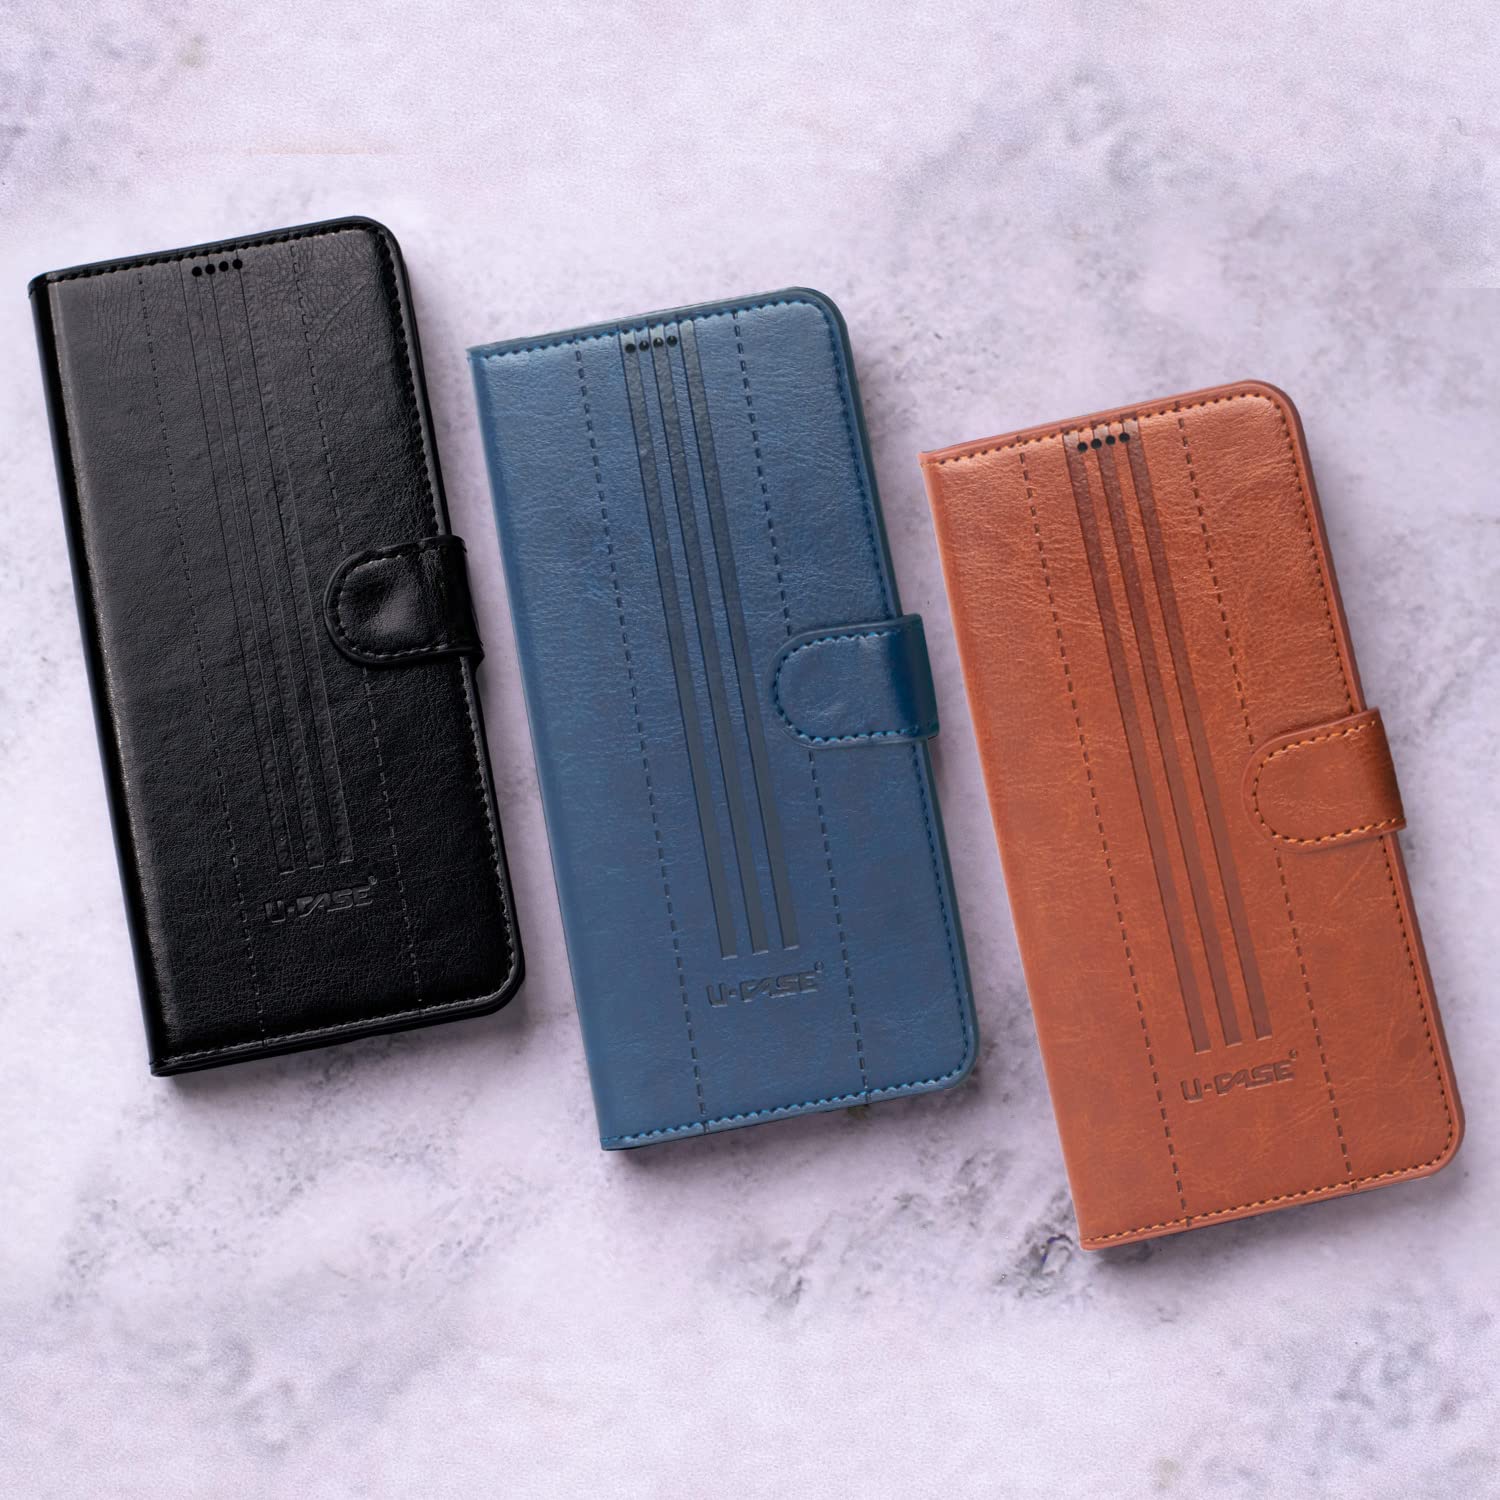 Shop U-CASE Flip Cover for Oppo A17 Vegan Foldable Stand & Pocket Magnetic Closure colors